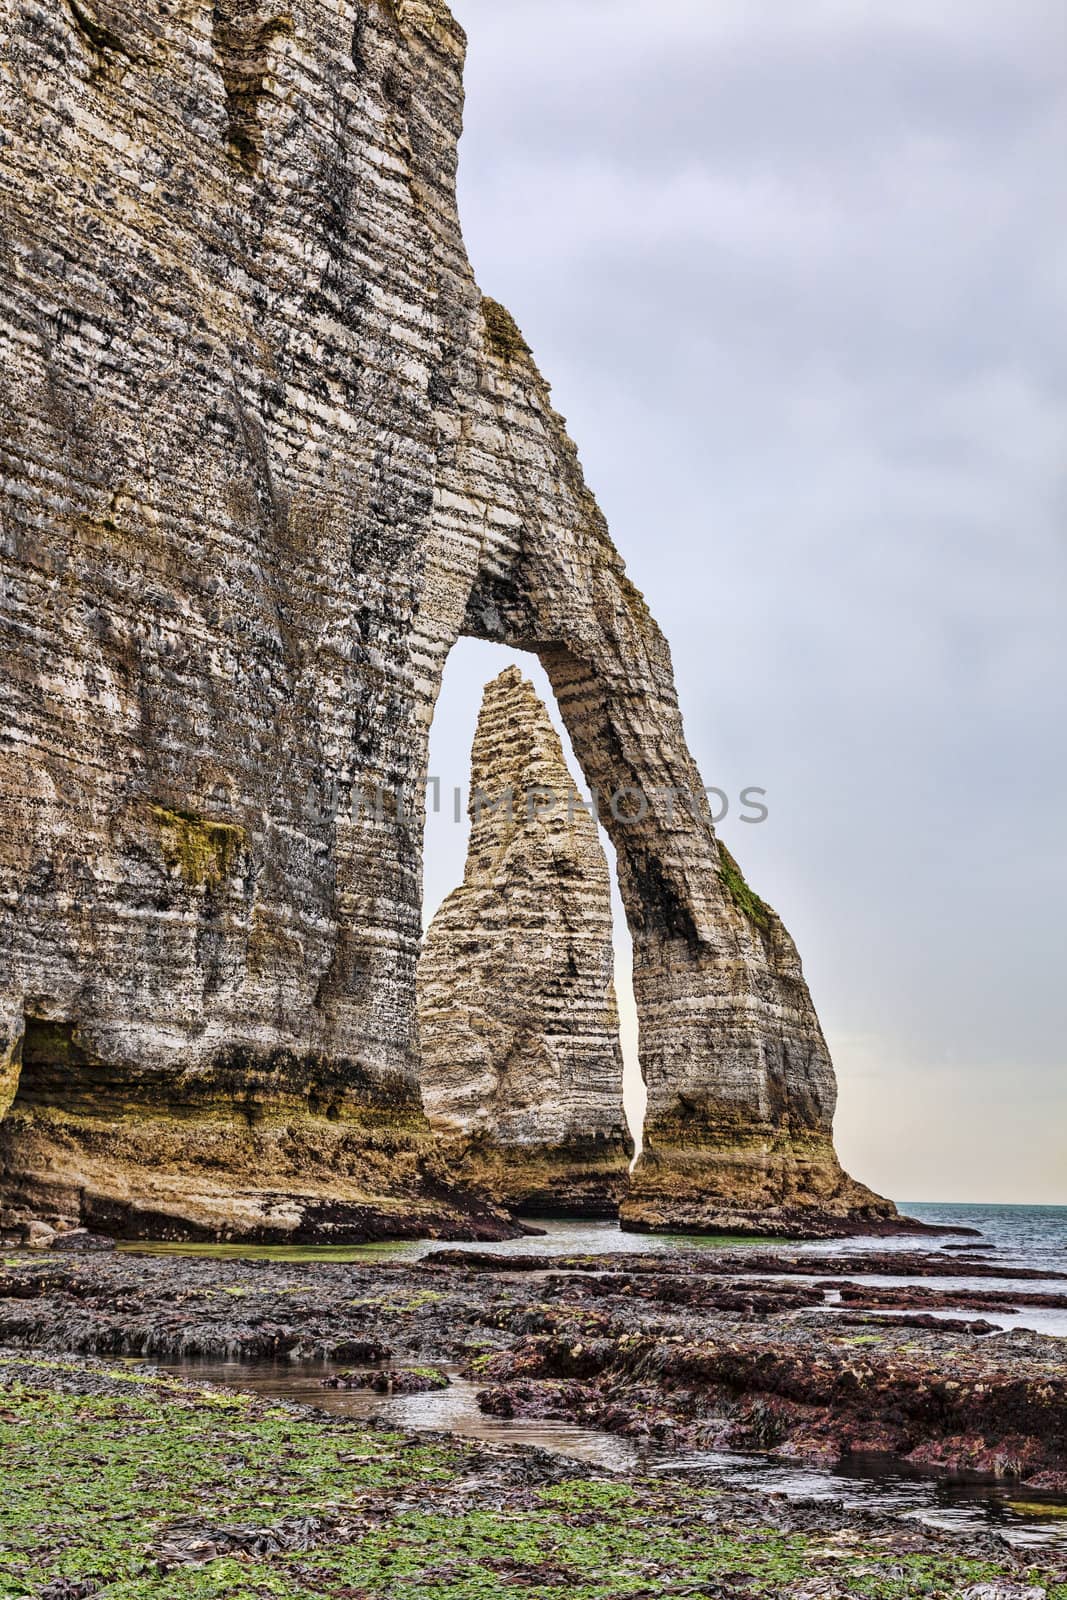 Specific cliffs in Etretat in the Upper-Normandy region in Northern France: a needle rock seen through a natural arch at the low tide time.